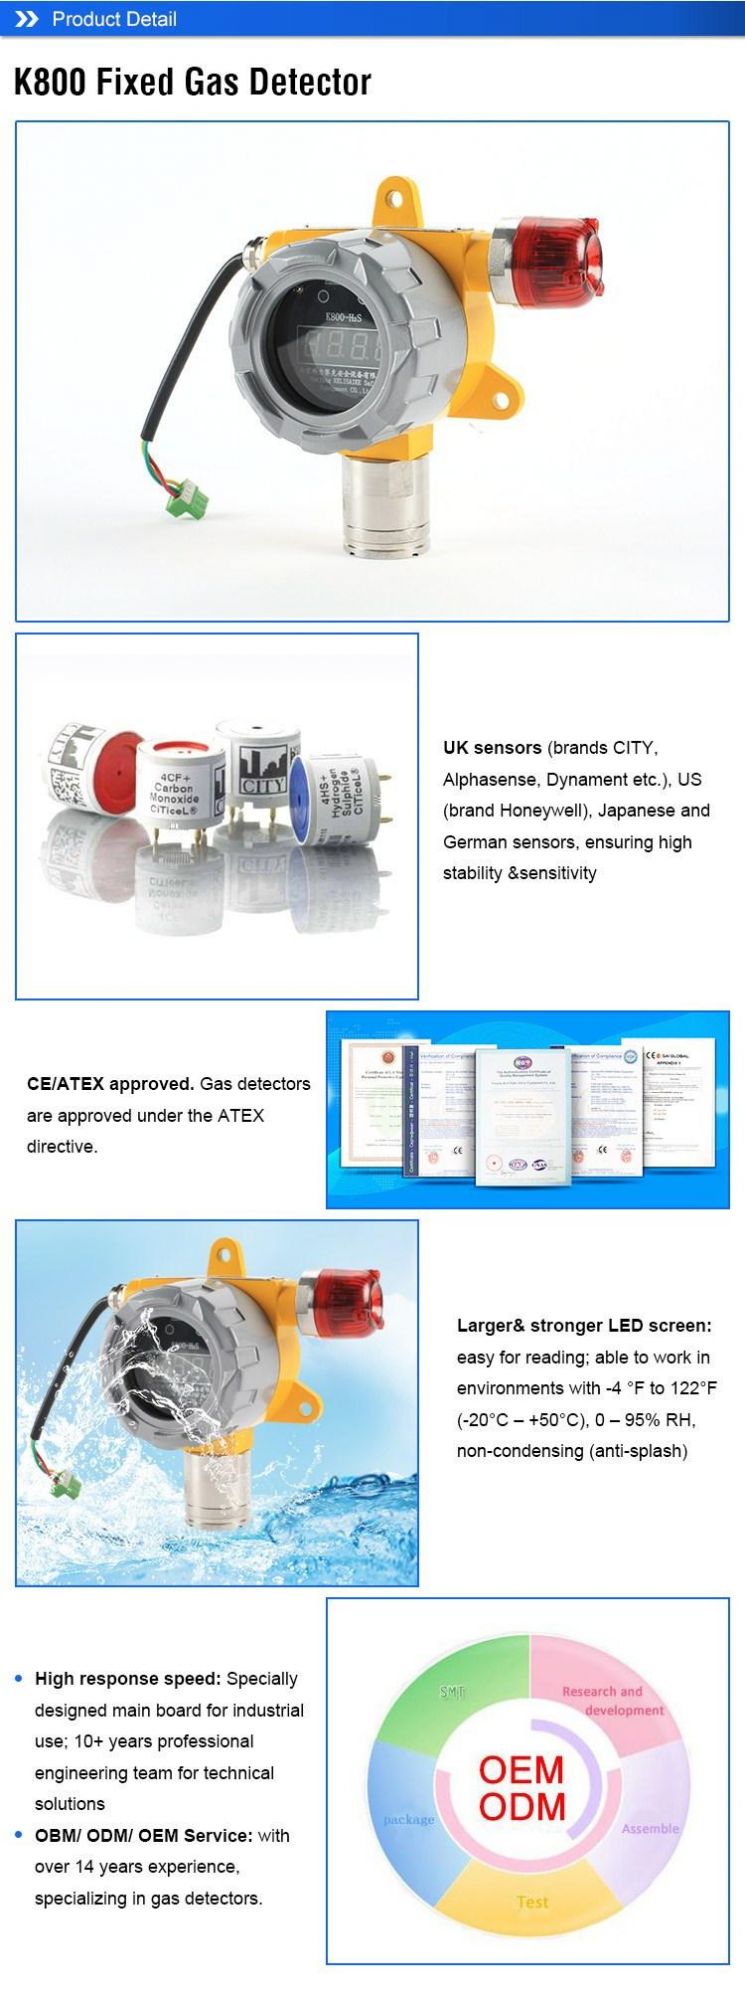 New Gas Alarm Personal Safety Equipment K800 Fixed Cheaper Price Propane Gas Detector From China Manufacturer